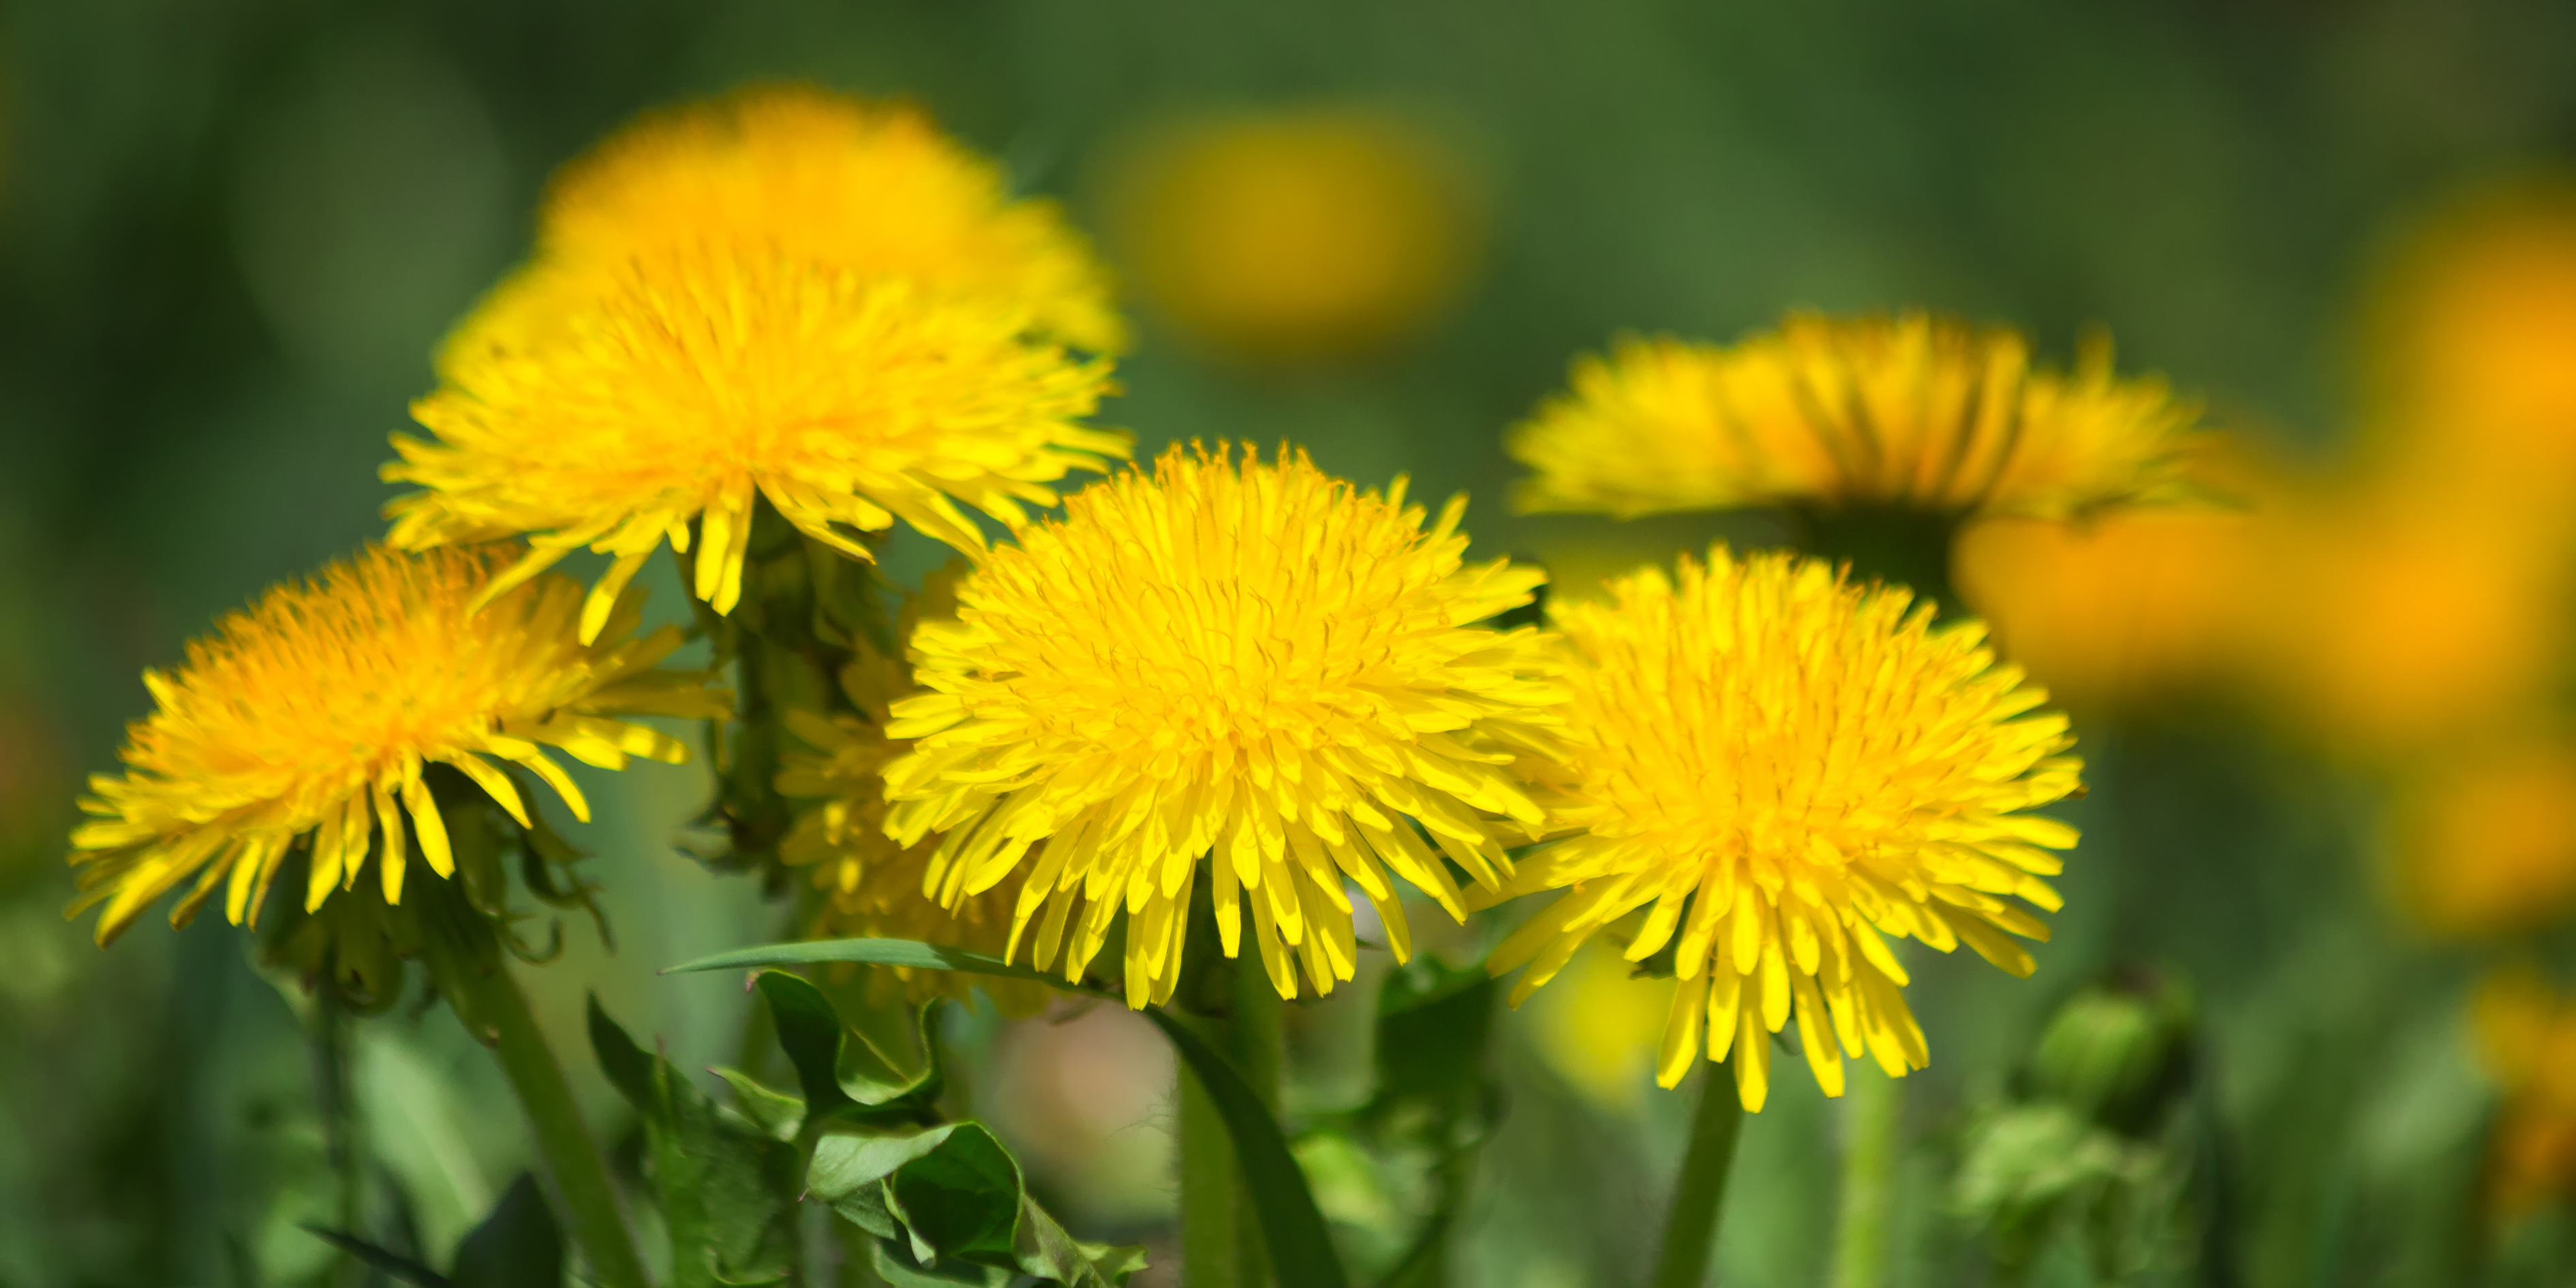 Dandelion Root v Dandelion Leaf. What is the difference?